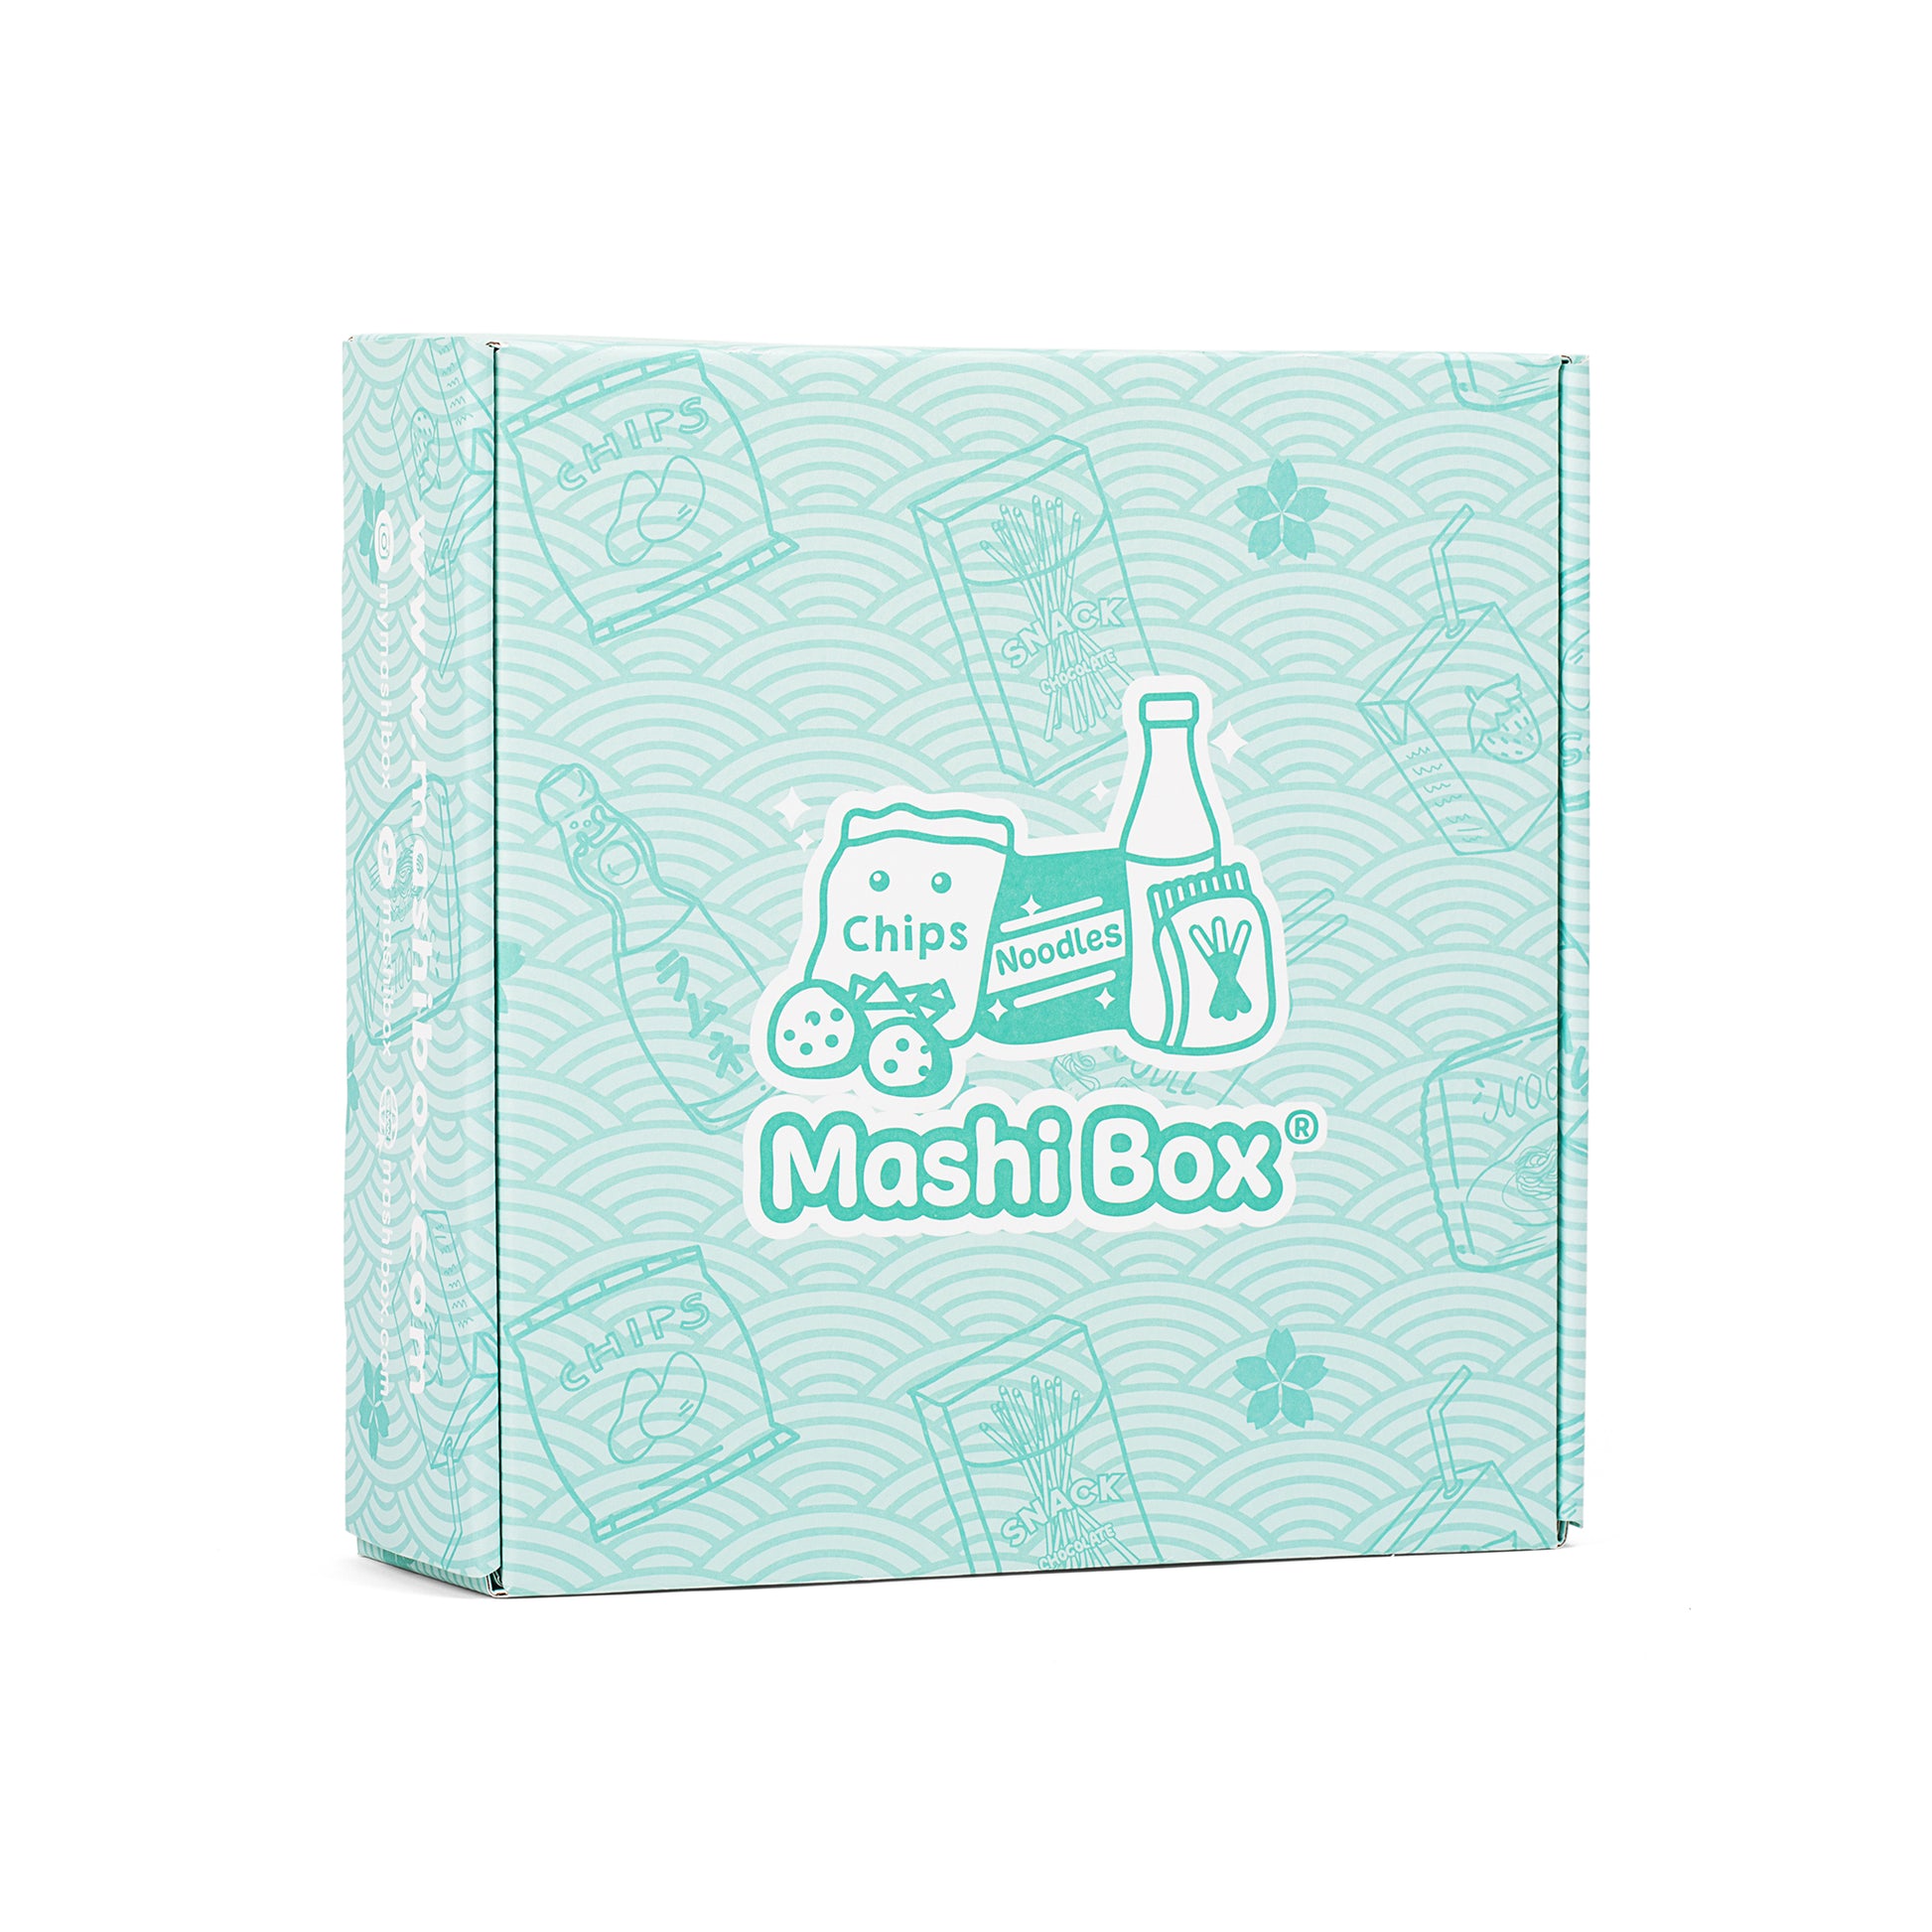 Mashi Box Asian Dagashi Snack Surprise Mystery Box 25 Pieces w/ 3 Full Size Items Including Drink Instant Noodle Assortment of Chinese Korean Japanes